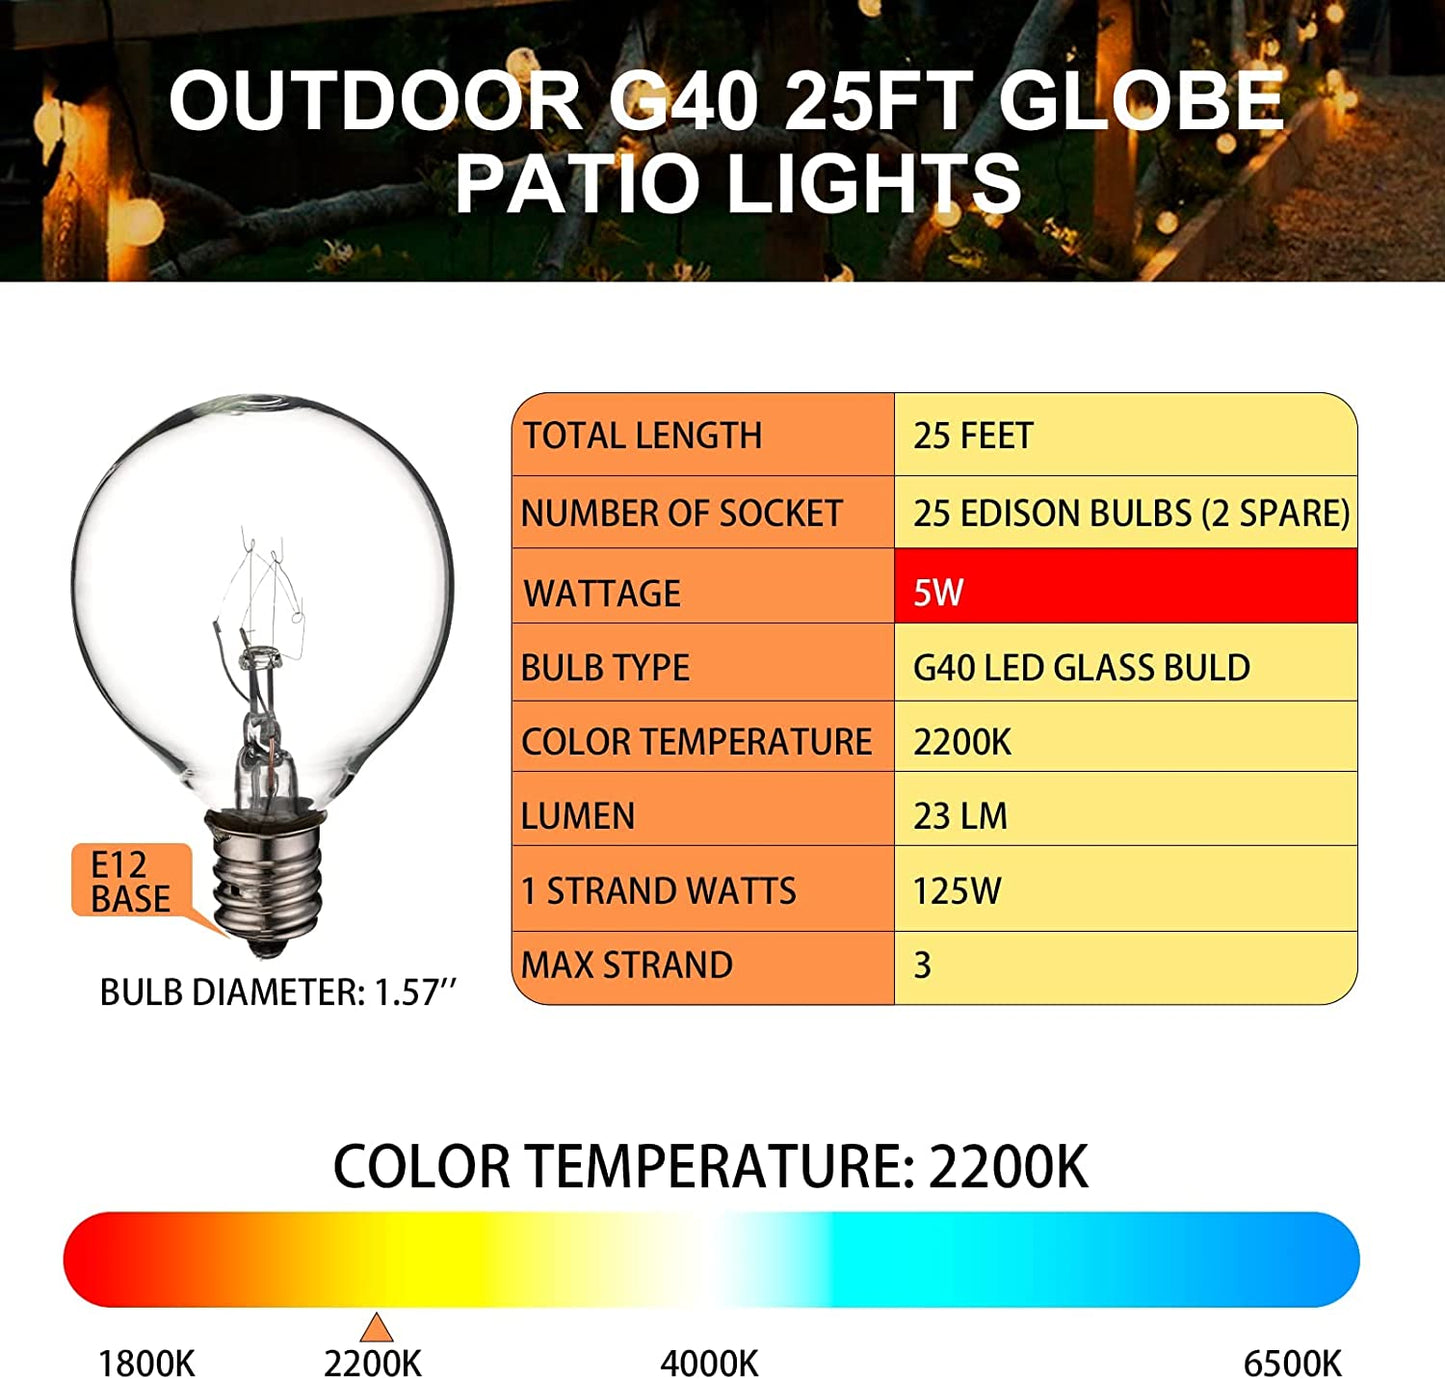 Patio String Light 25FT, 25 Bulbs(2 Spare) /5W & 2FT Extended Plug Cord, IP44 Waterproof Glass Edison Globe Outdoor Lights, Connectable Hanging Garden Light for Backyard Balcony Party Décor